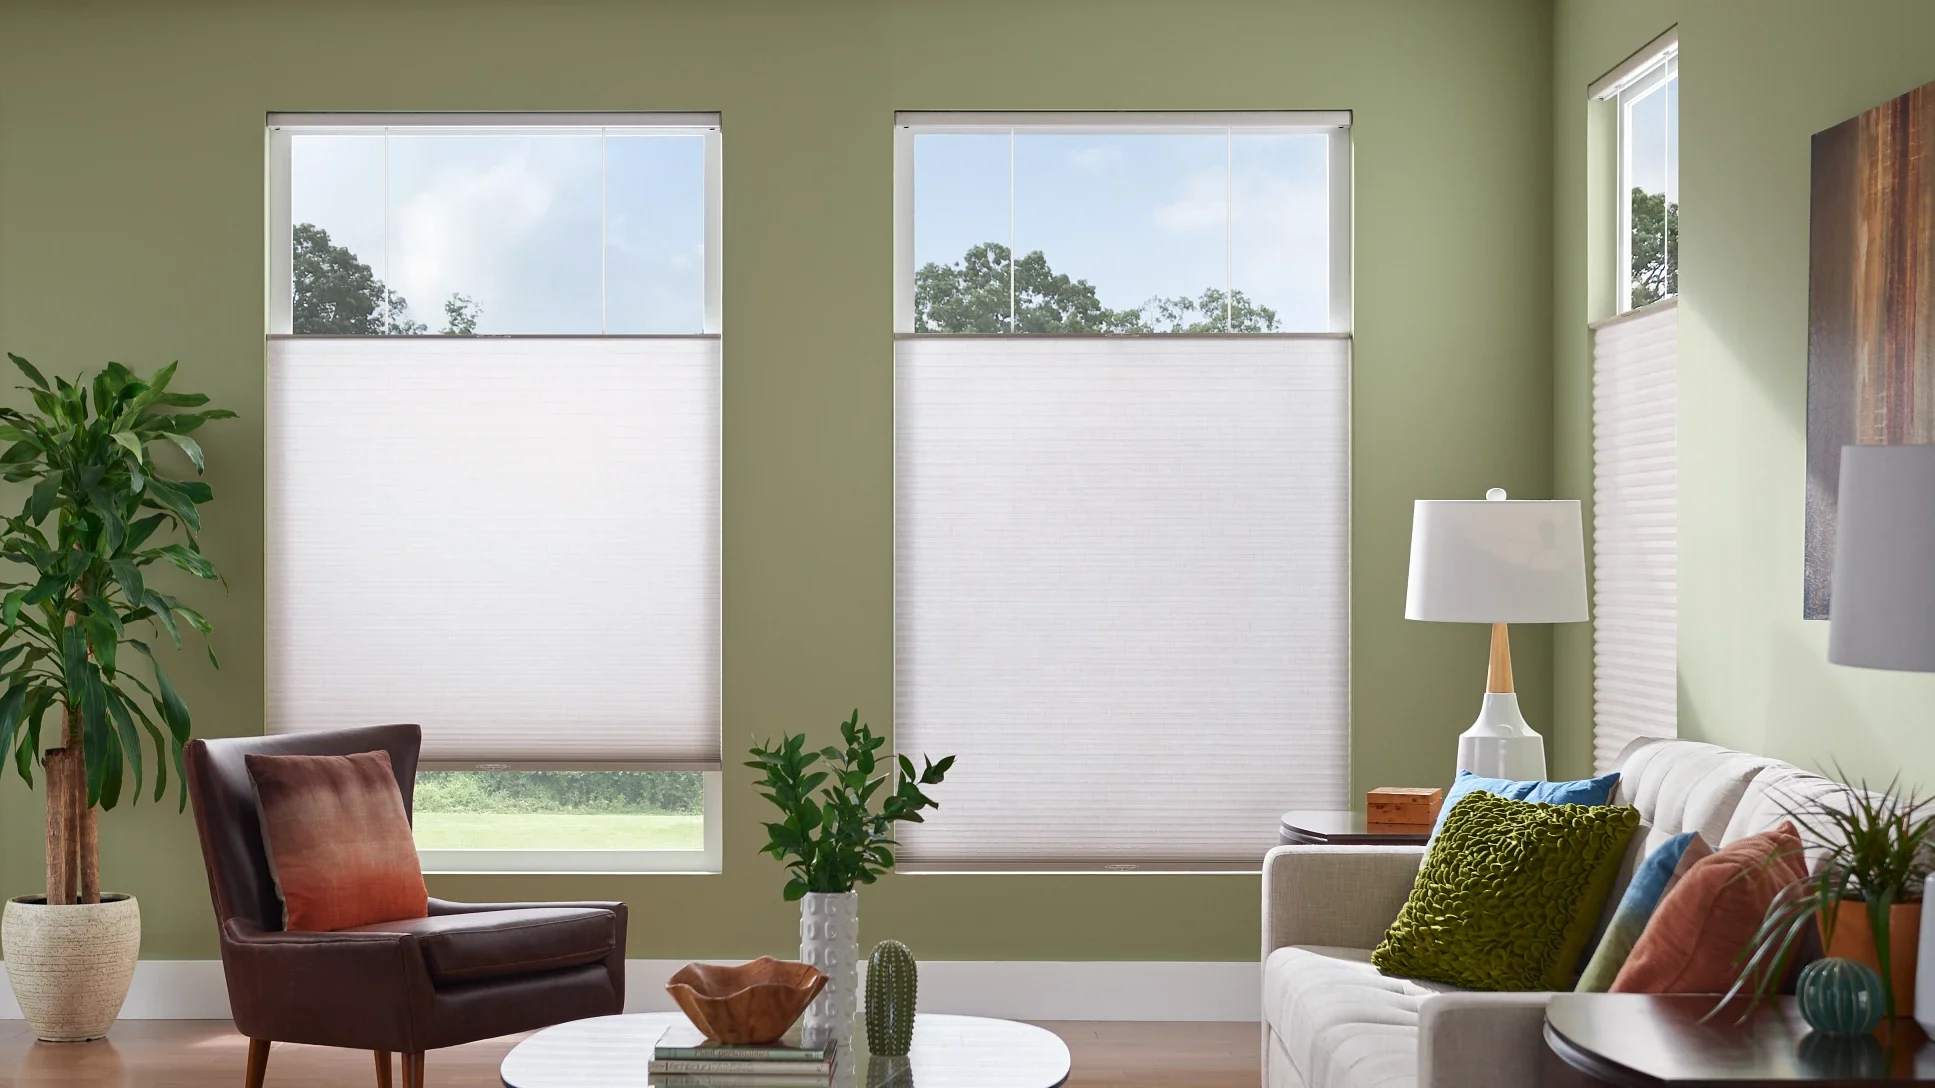 Honeycomb shades with Top-Down/Bottom-Up option and built-in child safety BandLift feature for peace of mind.